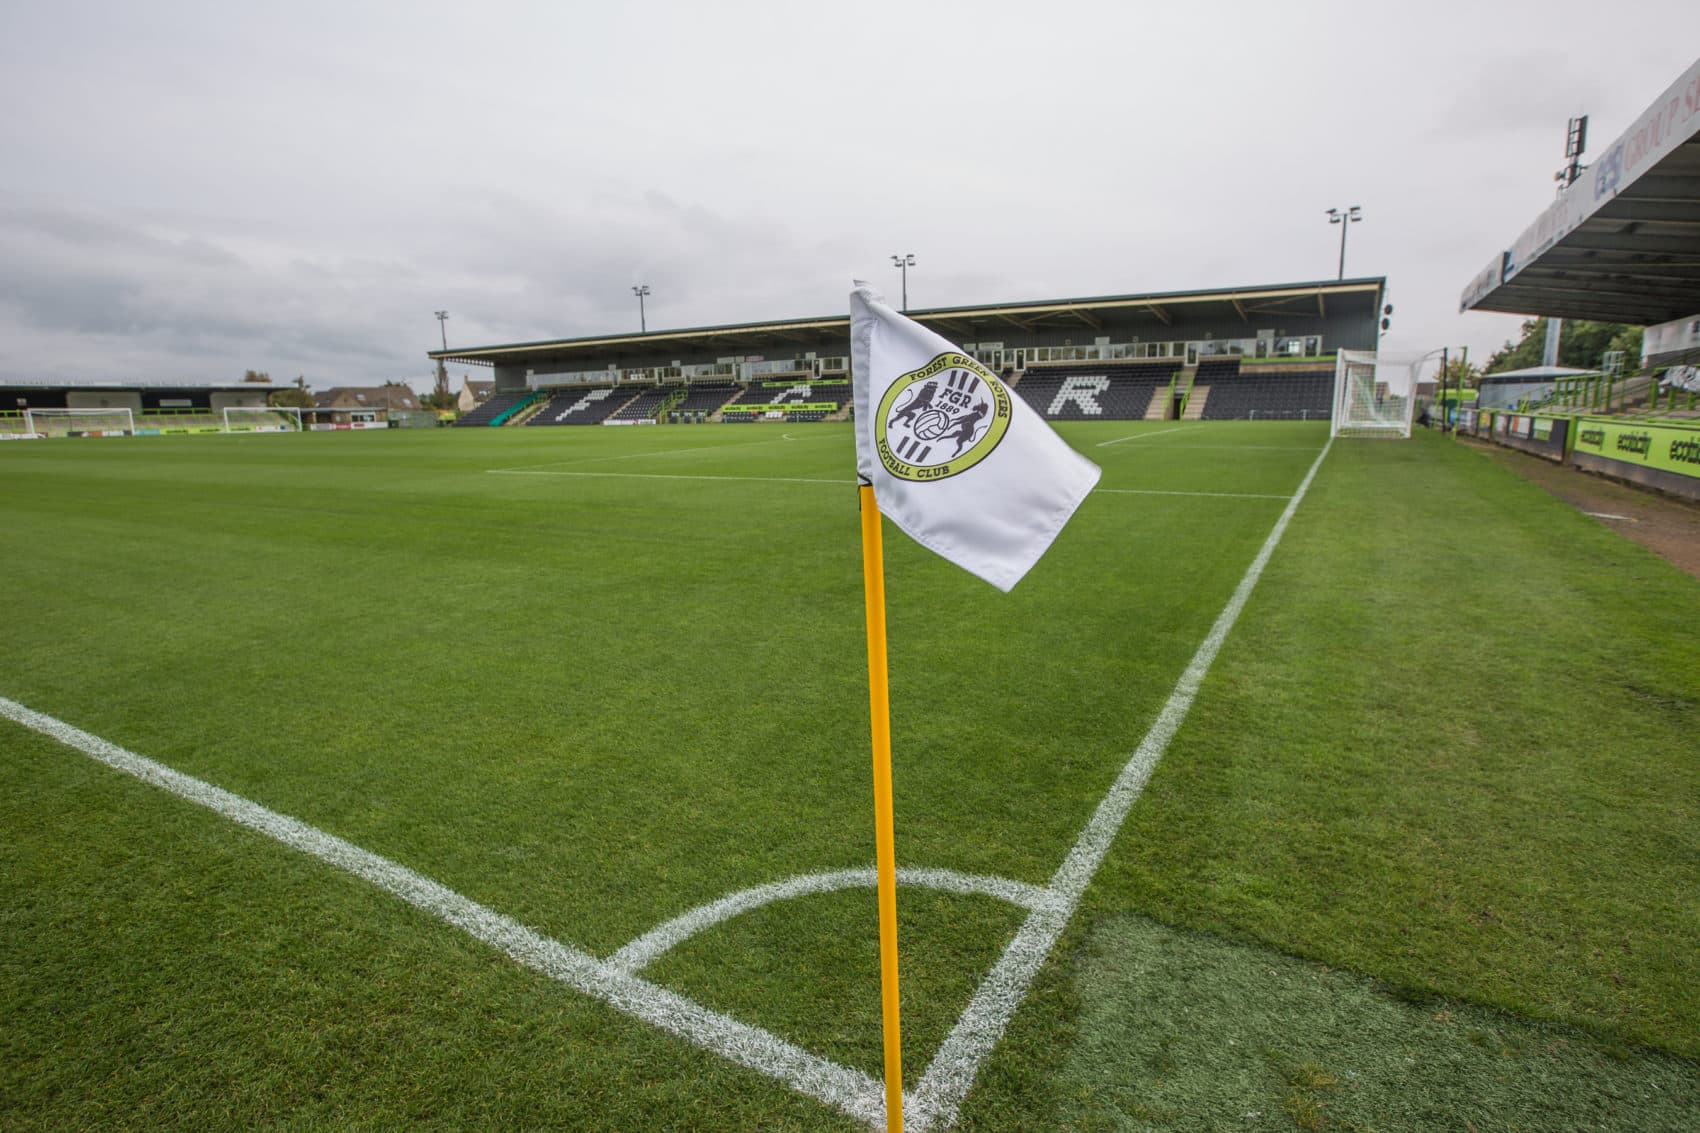 The Pitch at New Lawn. (Courtesy Forest Green Rovers. 